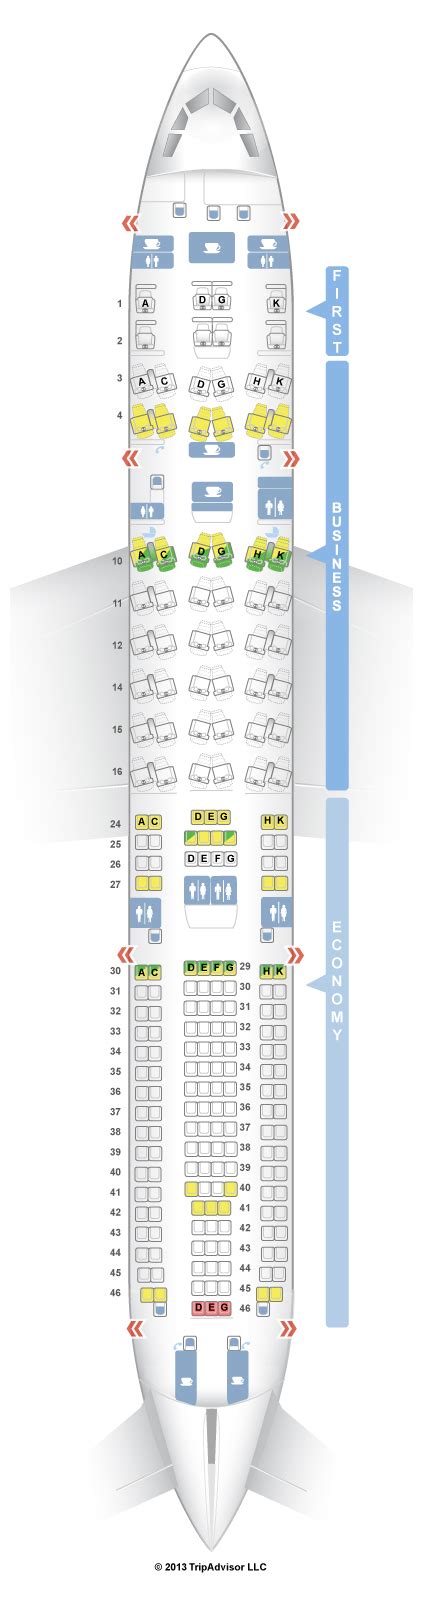 Seat guru lufthansa - Lufthansa Seat Maps. Overview; Planes & Seat Maps. Airbus A319 (319) Airbus A320 (320) Layout 1; Airbus A320 (320) Layout 2; Airbus A321 (321) Airbus A321neo (321) ... SeatGuru was created to help travelers choose the best seats and in-flight amenities. Forum; Mobile; FAQ; Contact Us; Site Map;